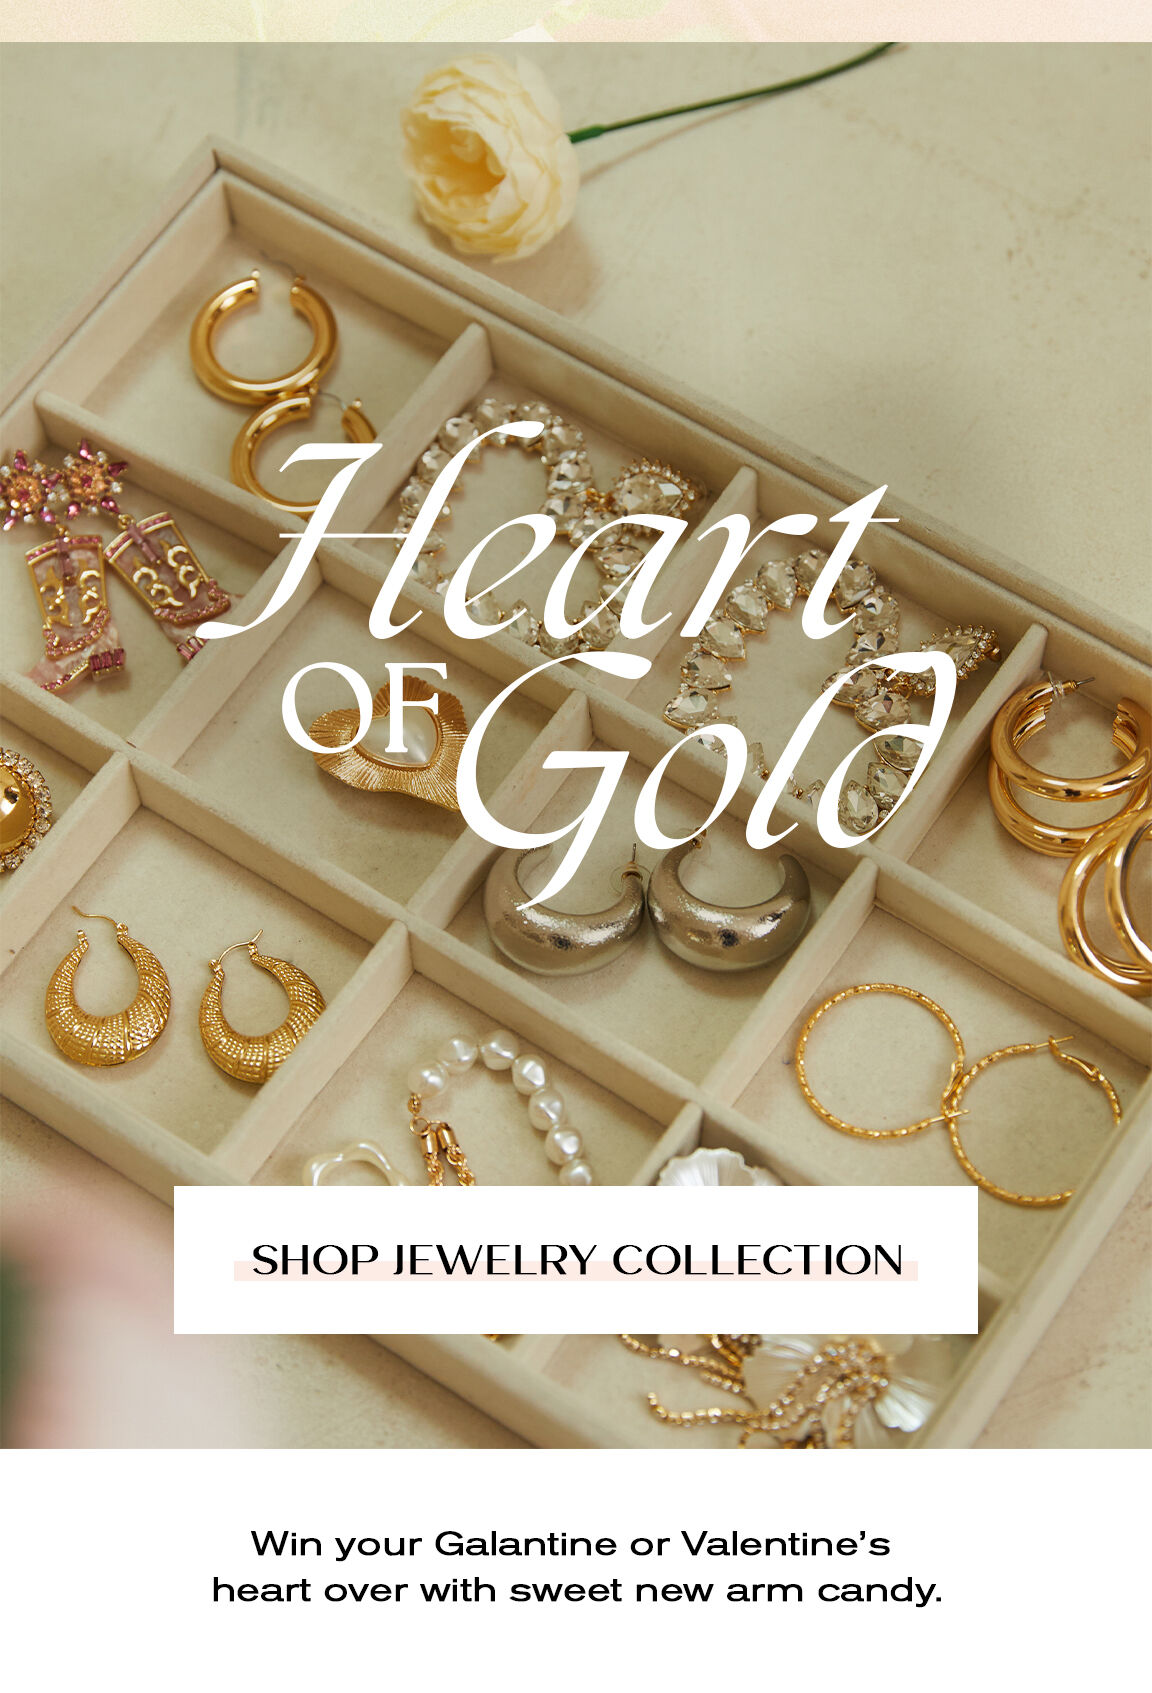  Win your Galantine or Valentines heart over with sweet new arm candy. 